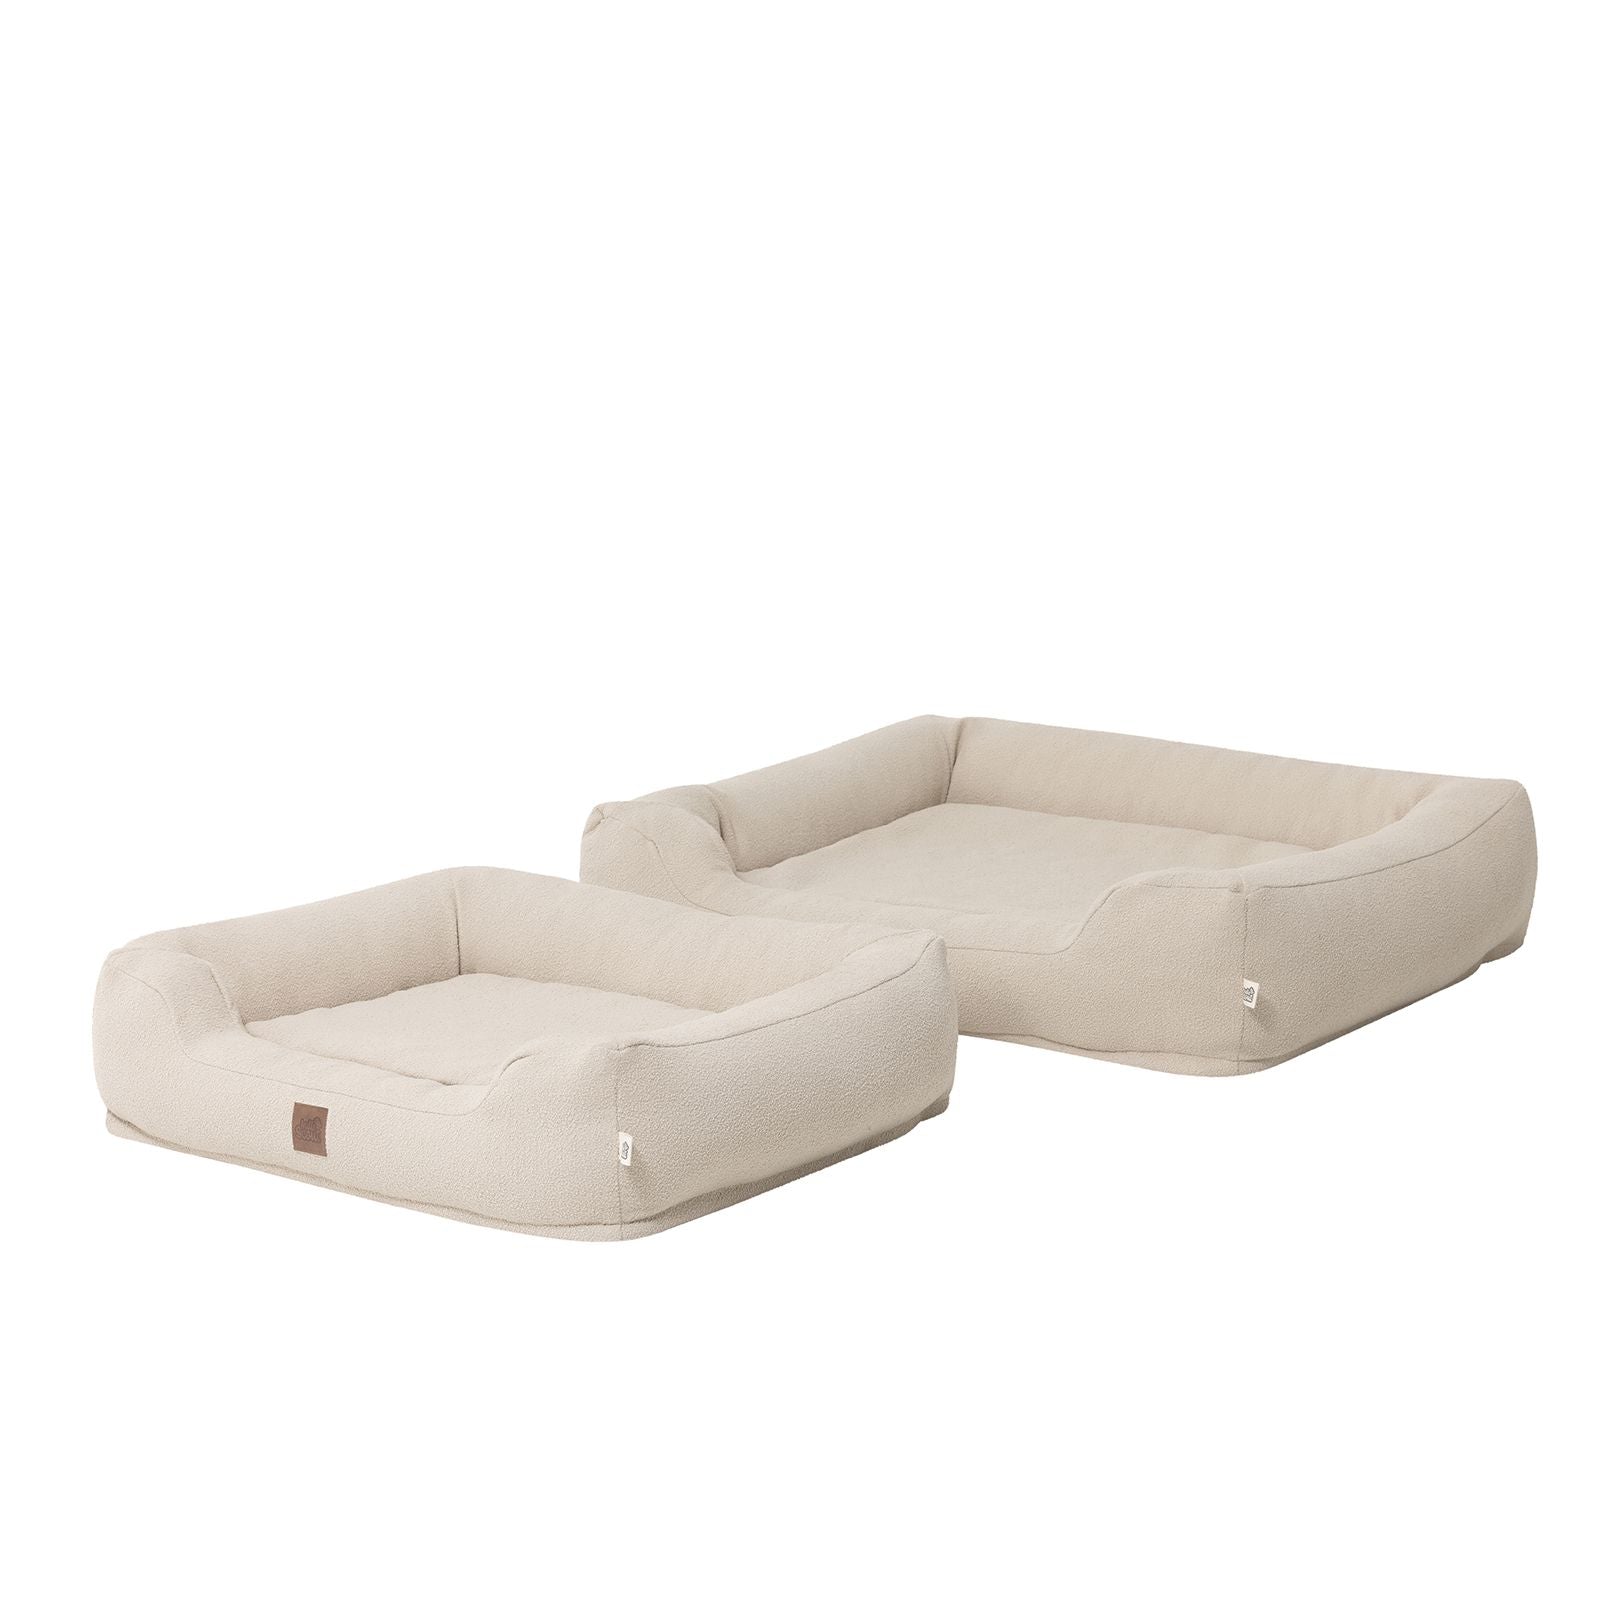 Boucle Bolster Bed